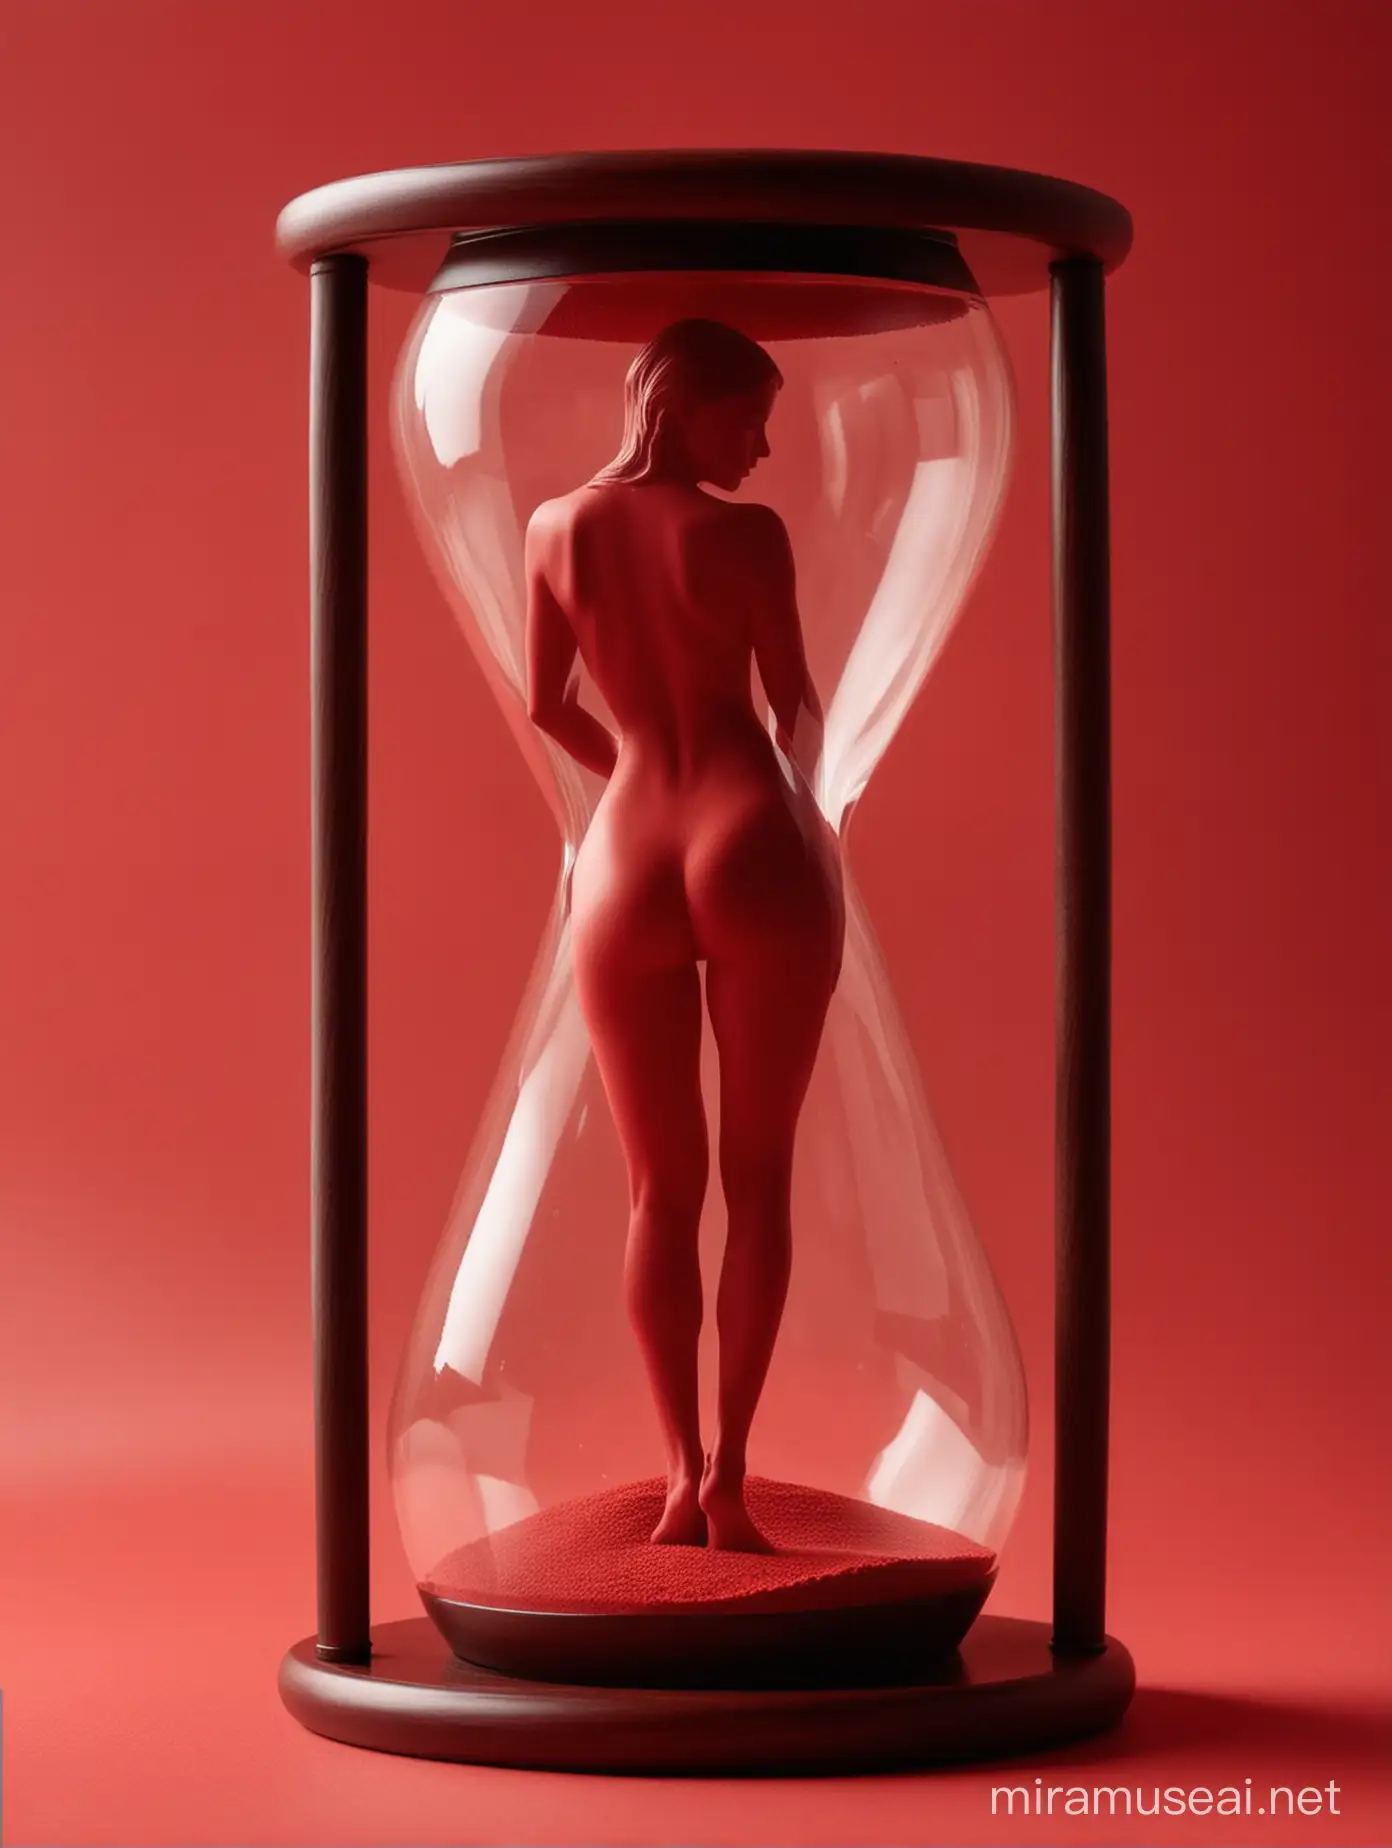 Hourglass that looks like  silhouette  of woman's body on red backround
